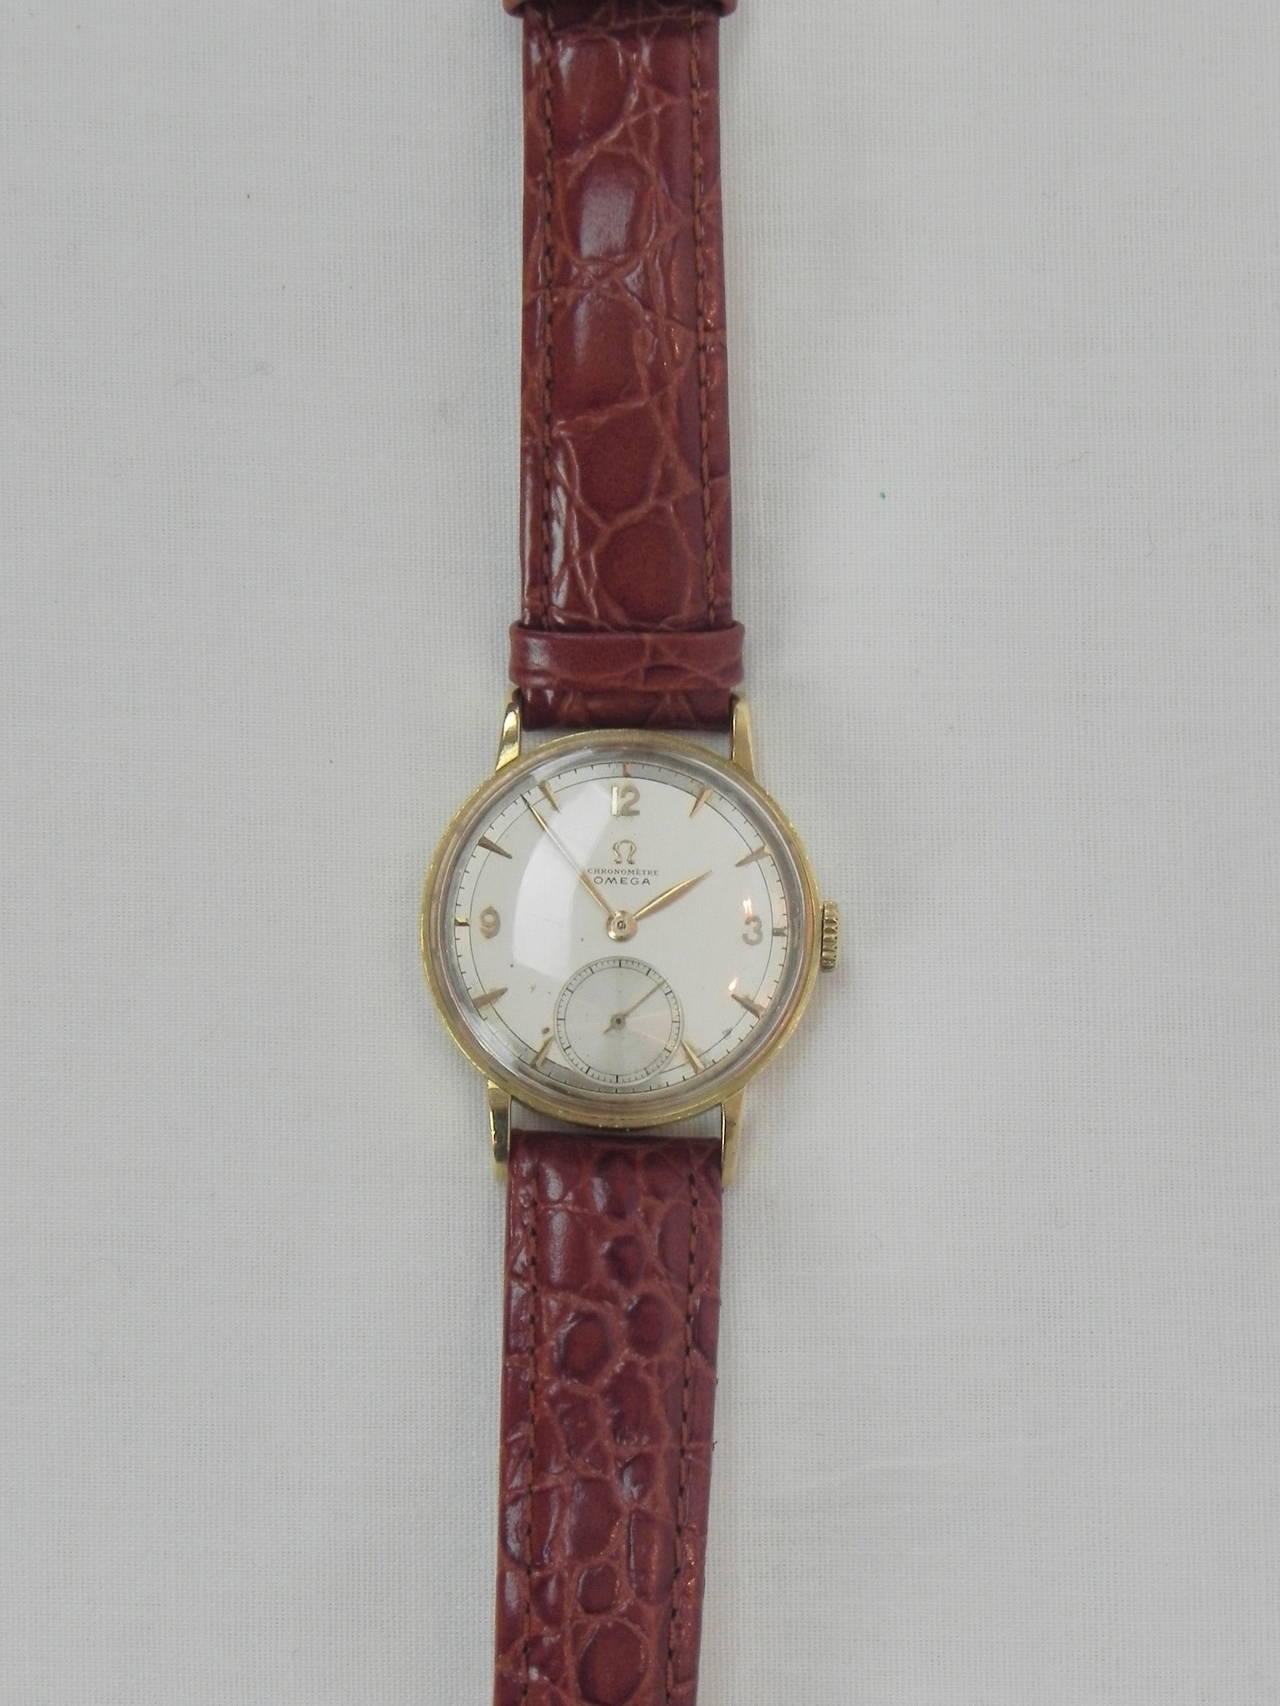 Omega 1950s Chronometer 18K yellow Gold Manual Wind .
Movement type 30-T2R .Good condition with original Sub second Dial .
Case and Movement in Good Condition. Dial is original with a few small spots on the Dial. Highly accurate Chronometer